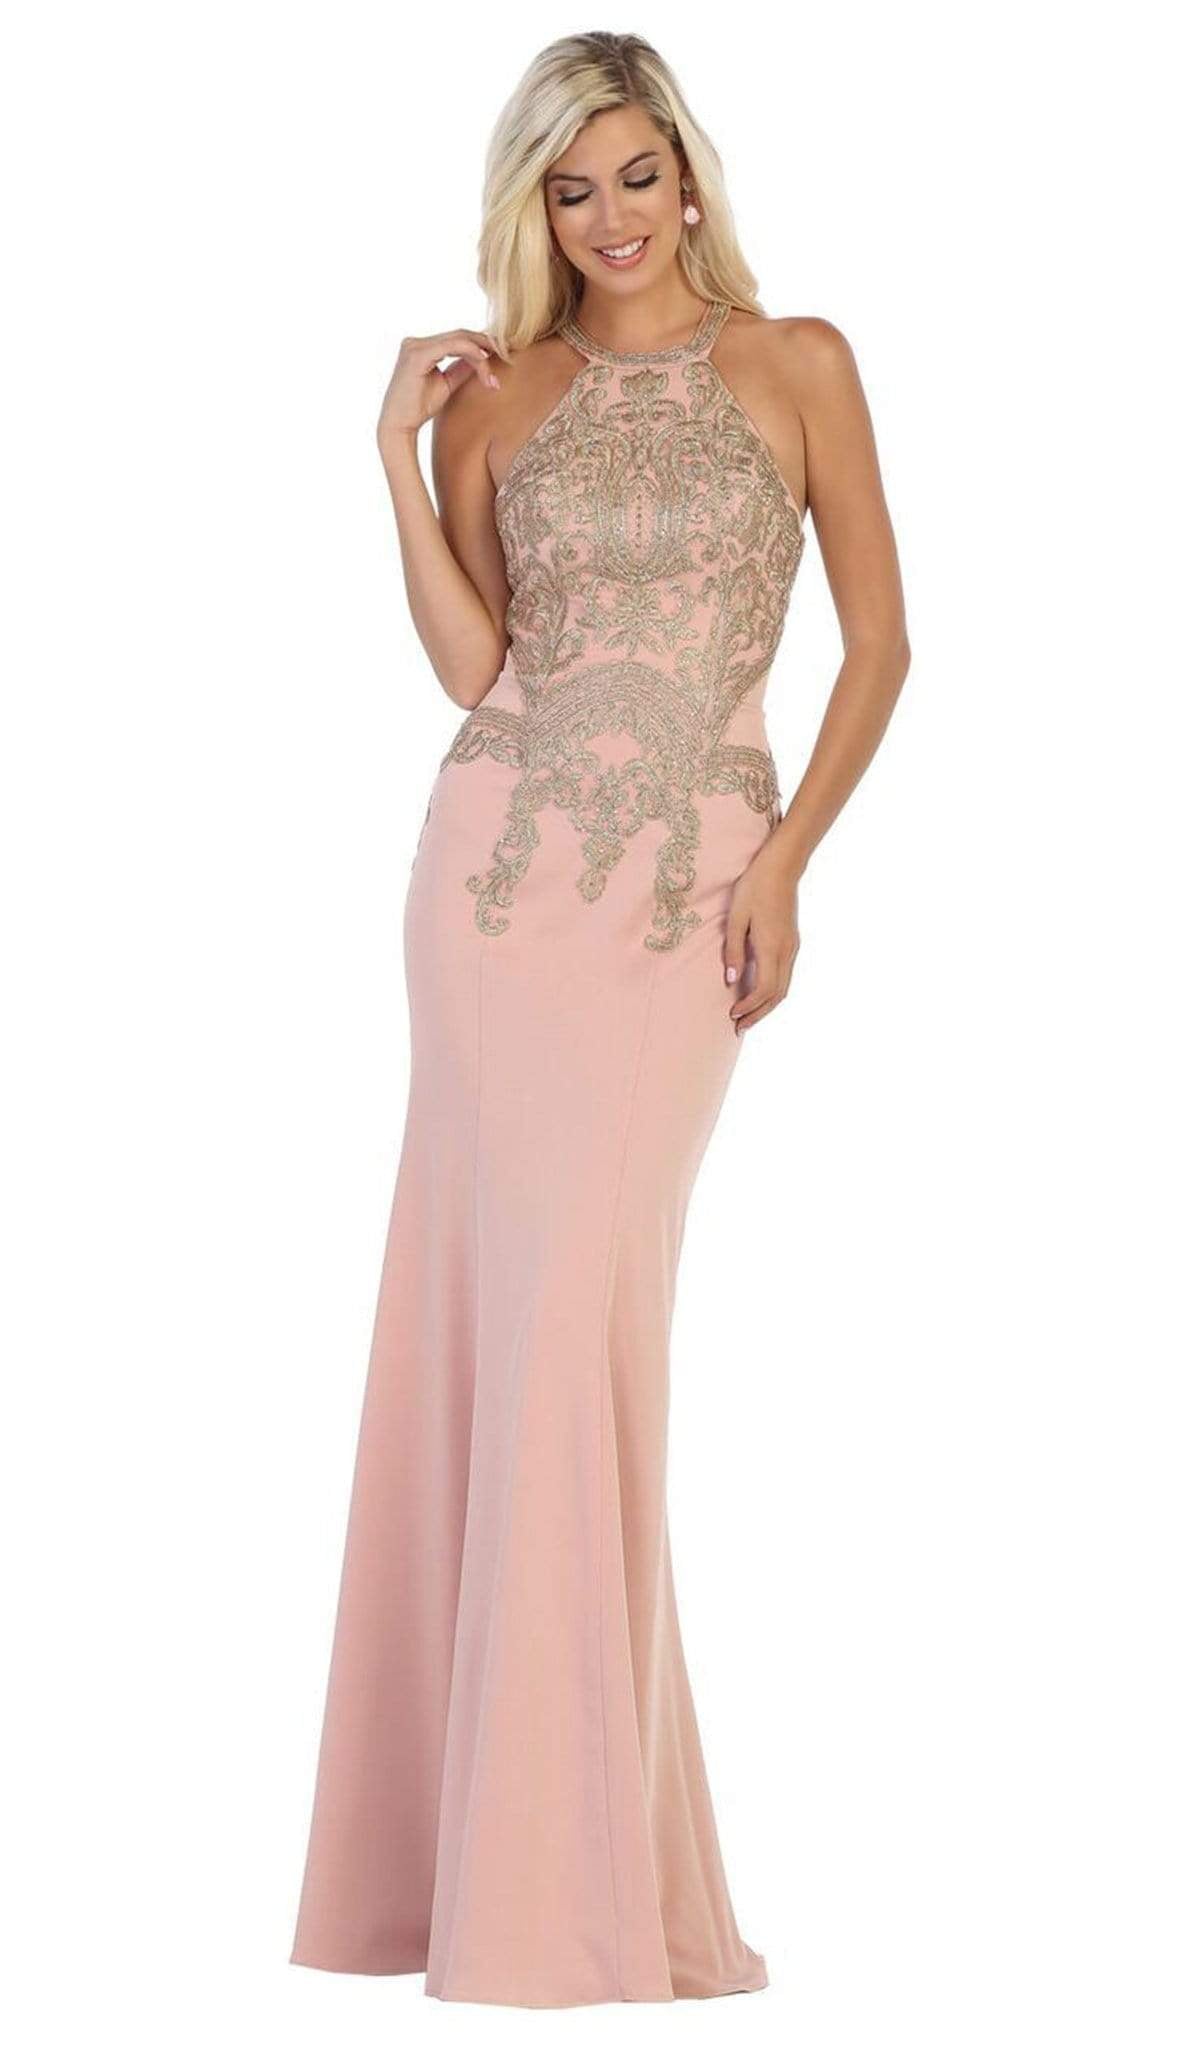 May Queen - MQ1641 Gilt-Embroidered Lace Halter Gown Special Occasion Dress 4 / Dusty Rose